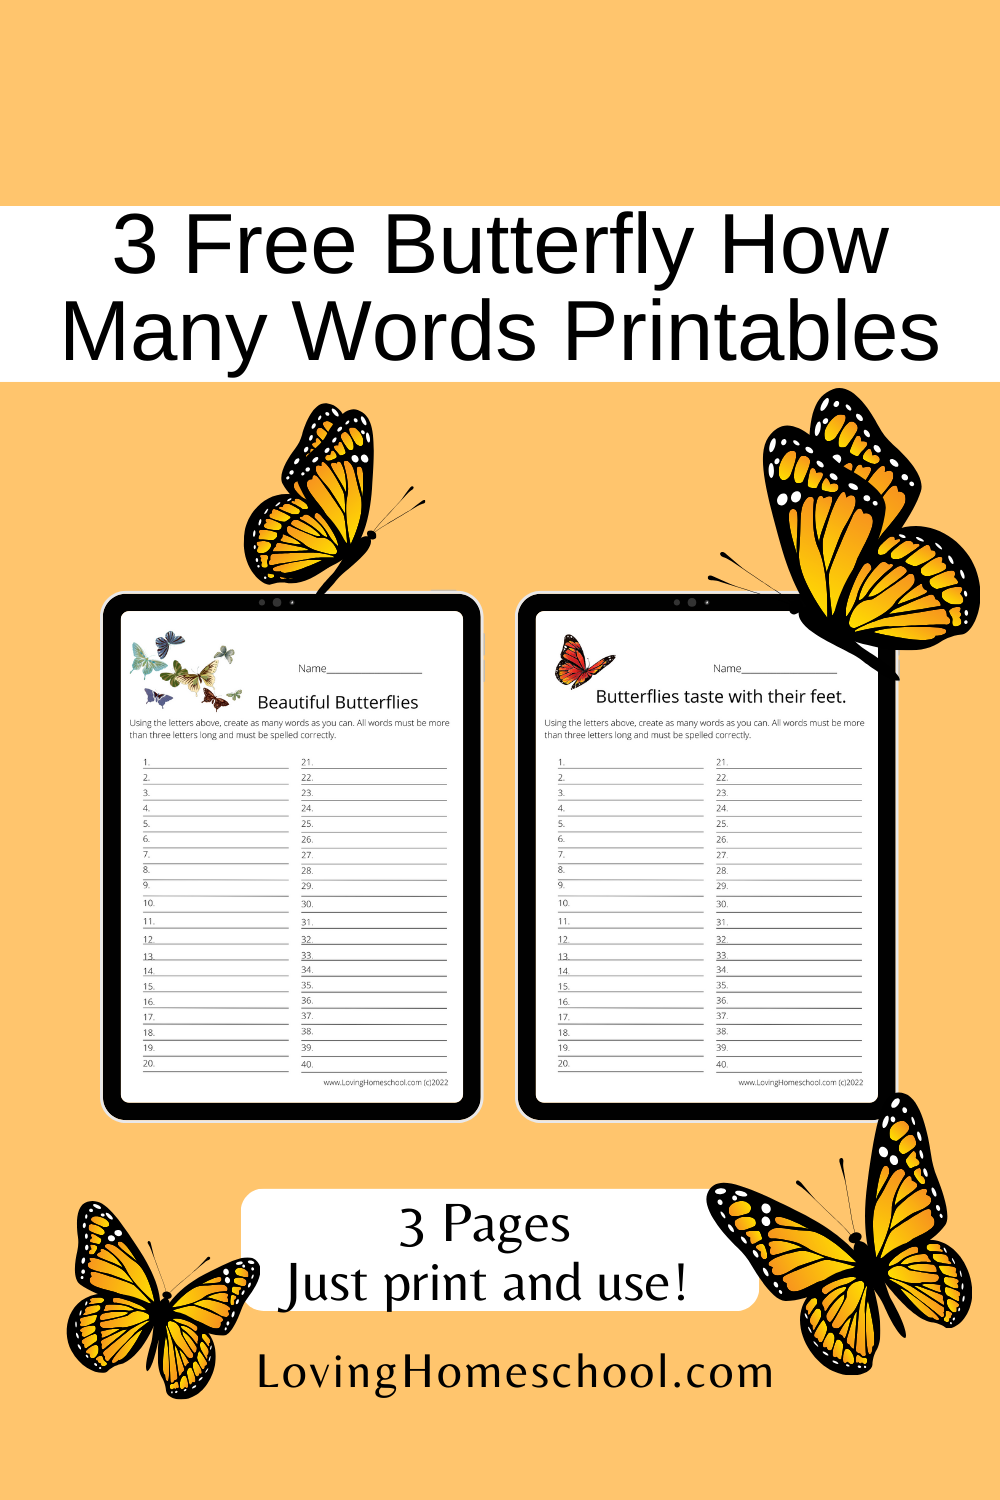 3 Free Butterfly How Many Words Printables Pinterest Pin